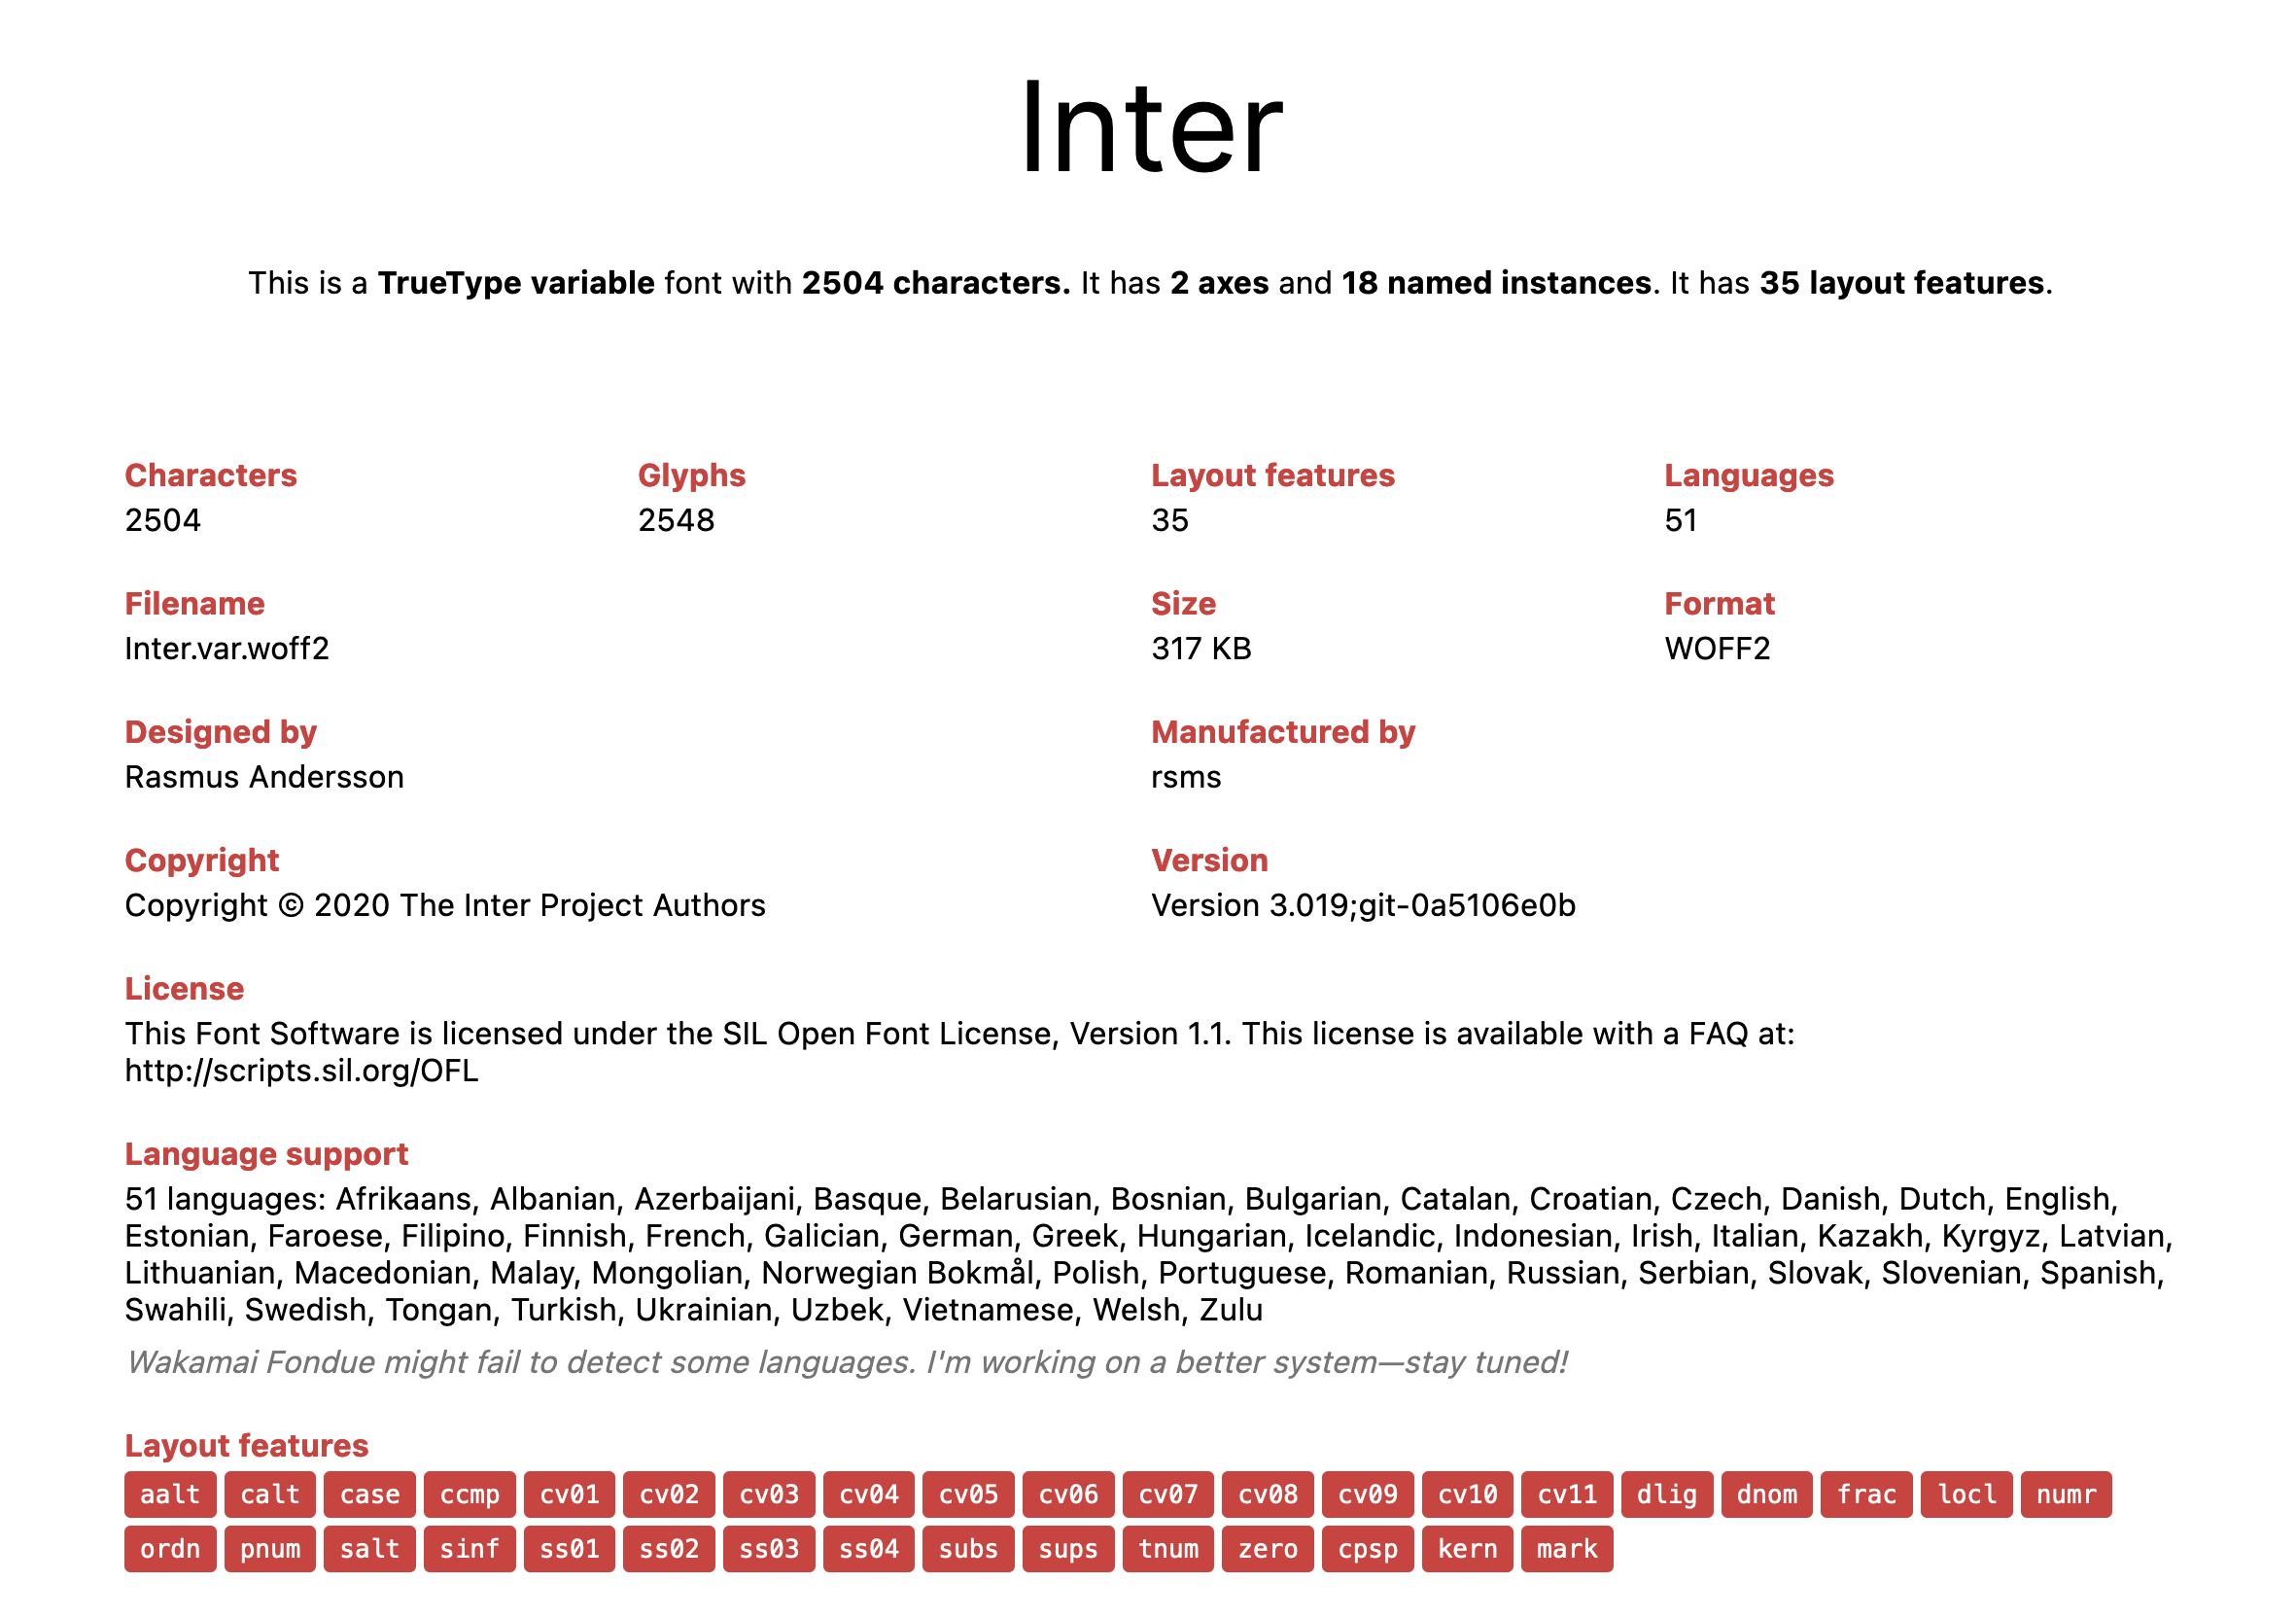 
Inter

This is a TrueType variable font with 2504 characters. It has 2 axes and 18 named instances. It has 35 layout features.

Characters: 2504
Glyphs: 2548
Layout features: 35
Languages: 51

Filename: Inter.var.woff2
Size: 317 KB
Format: WOFF2

Designed by: Rasmus Andersson
Manufactured by: rsms

Copyright: Copyright © 2020 The Inter Project Authors
Version: Version 3.019;git-0a5106e0b

License
This Font Software is licensed under the SIL Open Font License, Version 1.1. This license is available with a FAQ at: http://scripts.sil.org/OFL

Language support

51 languages: Afrikaans, Albanian, Azerbaijani, Basque, Belarusian, Bosnian, Bulgarian, Catalan, Croatian, Czech, Danish, Dutch, English, Estonian, Faroese, Filipino, Finnish, French, Galician, German, Greek, Hungarian, Icelandic, Indonesian, Irish, Italian, Kazakh, Kyrgyz, Latvian, Lithuanian, Macedonian, Malay, Mongolian, Norwegian Bokmål, Polish, Portuguese, Romanian, Russian, Serbian, Slovak, Slovenian, Spanish, Swahili, Swedish, Tongan, Turkish, Ukrainian, Uzbek, Vietnamese, Welsh, Zulu